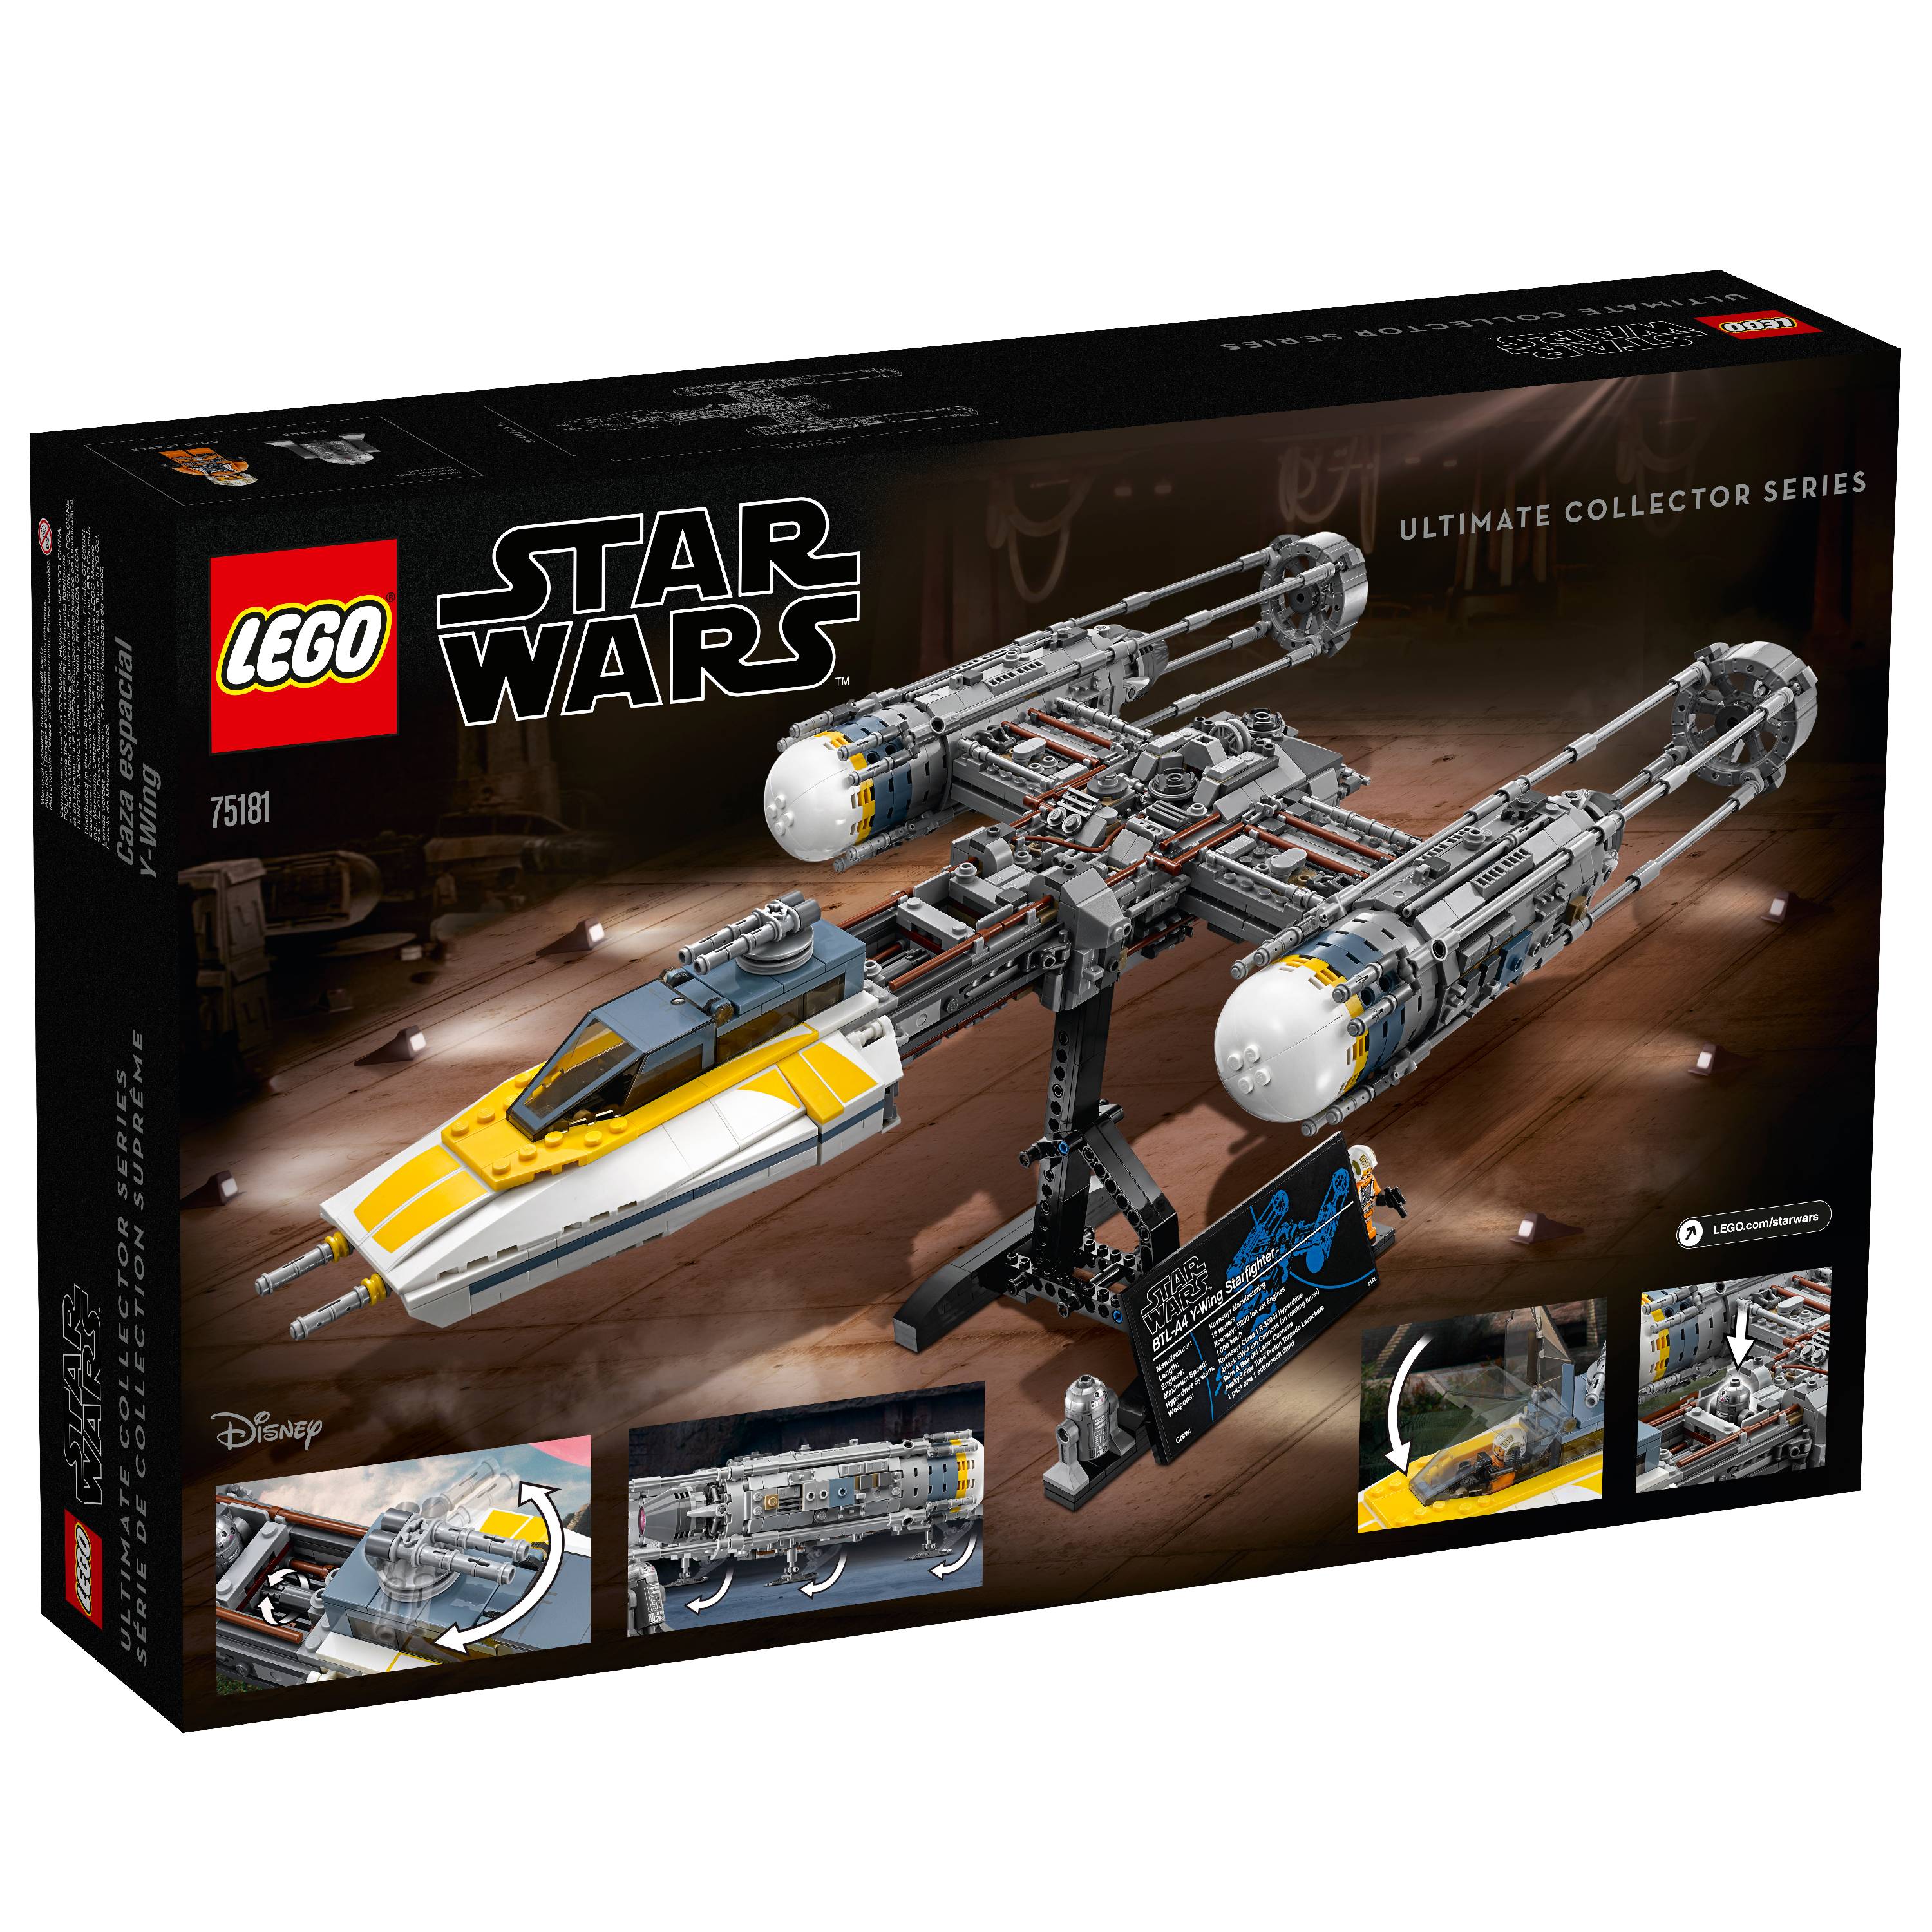 LEGO Star WarsY-Wing Starfighter 75181 Star Wars Ultimate Collector Toy - image 4 of 6